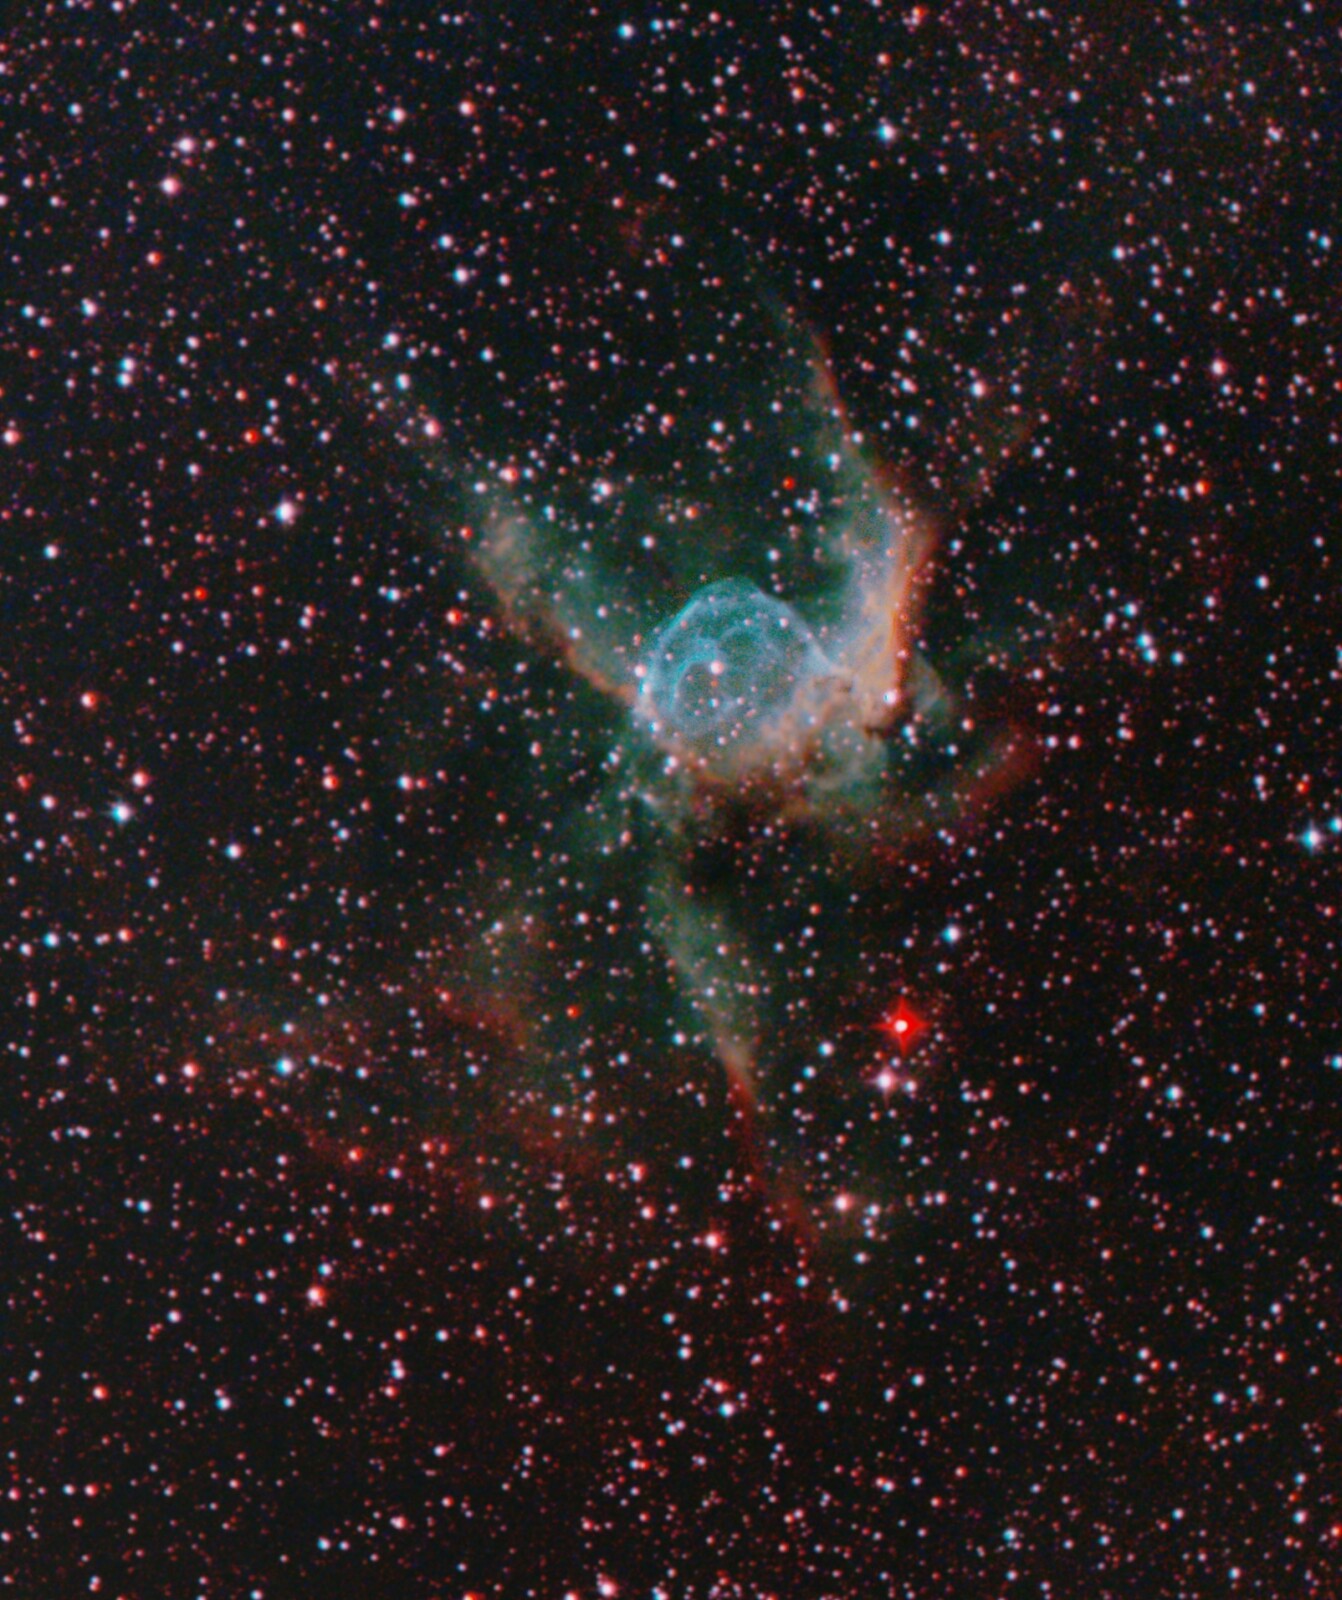 Thor's helmet NGC2359 from February 25th, 26th, 2022; total 32x10min; 8" f/4 newtonian and mod. Canon 600d; IDAS V4-filter + Astronomik UHC filter